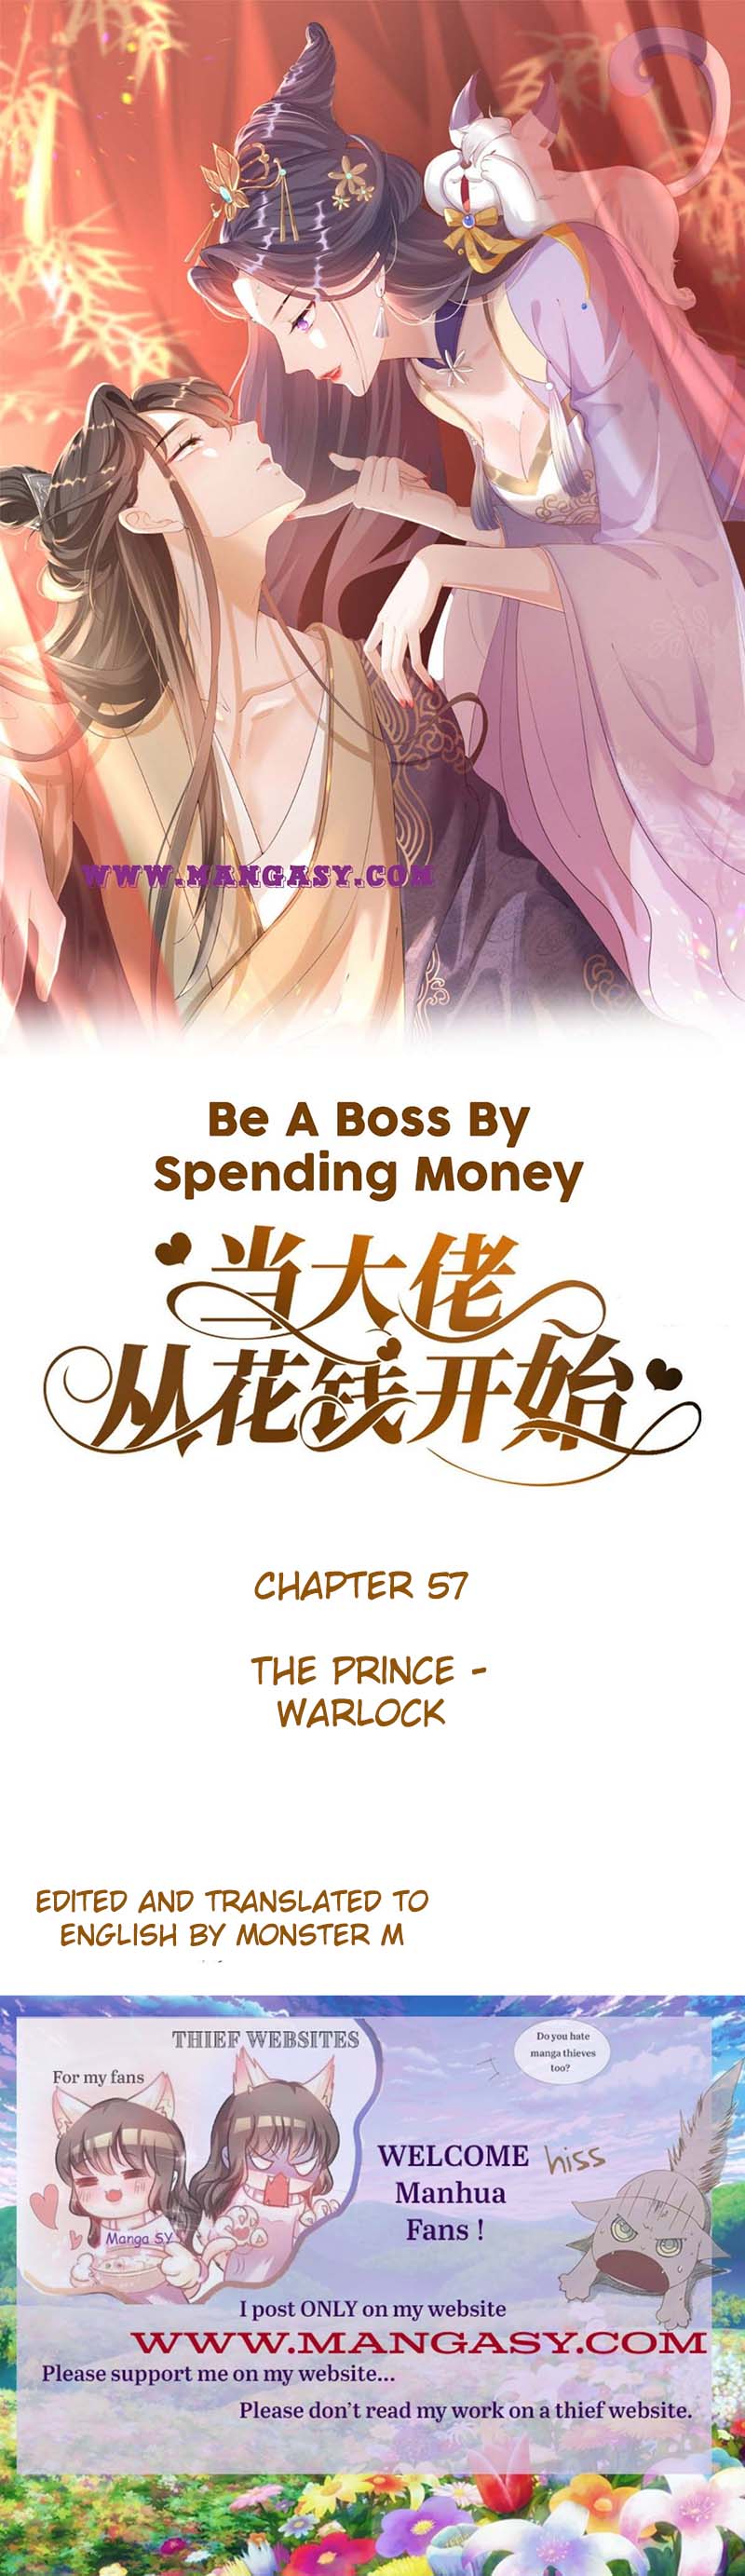 Becoming a Big Boss Starts with Spending Money chapter 57